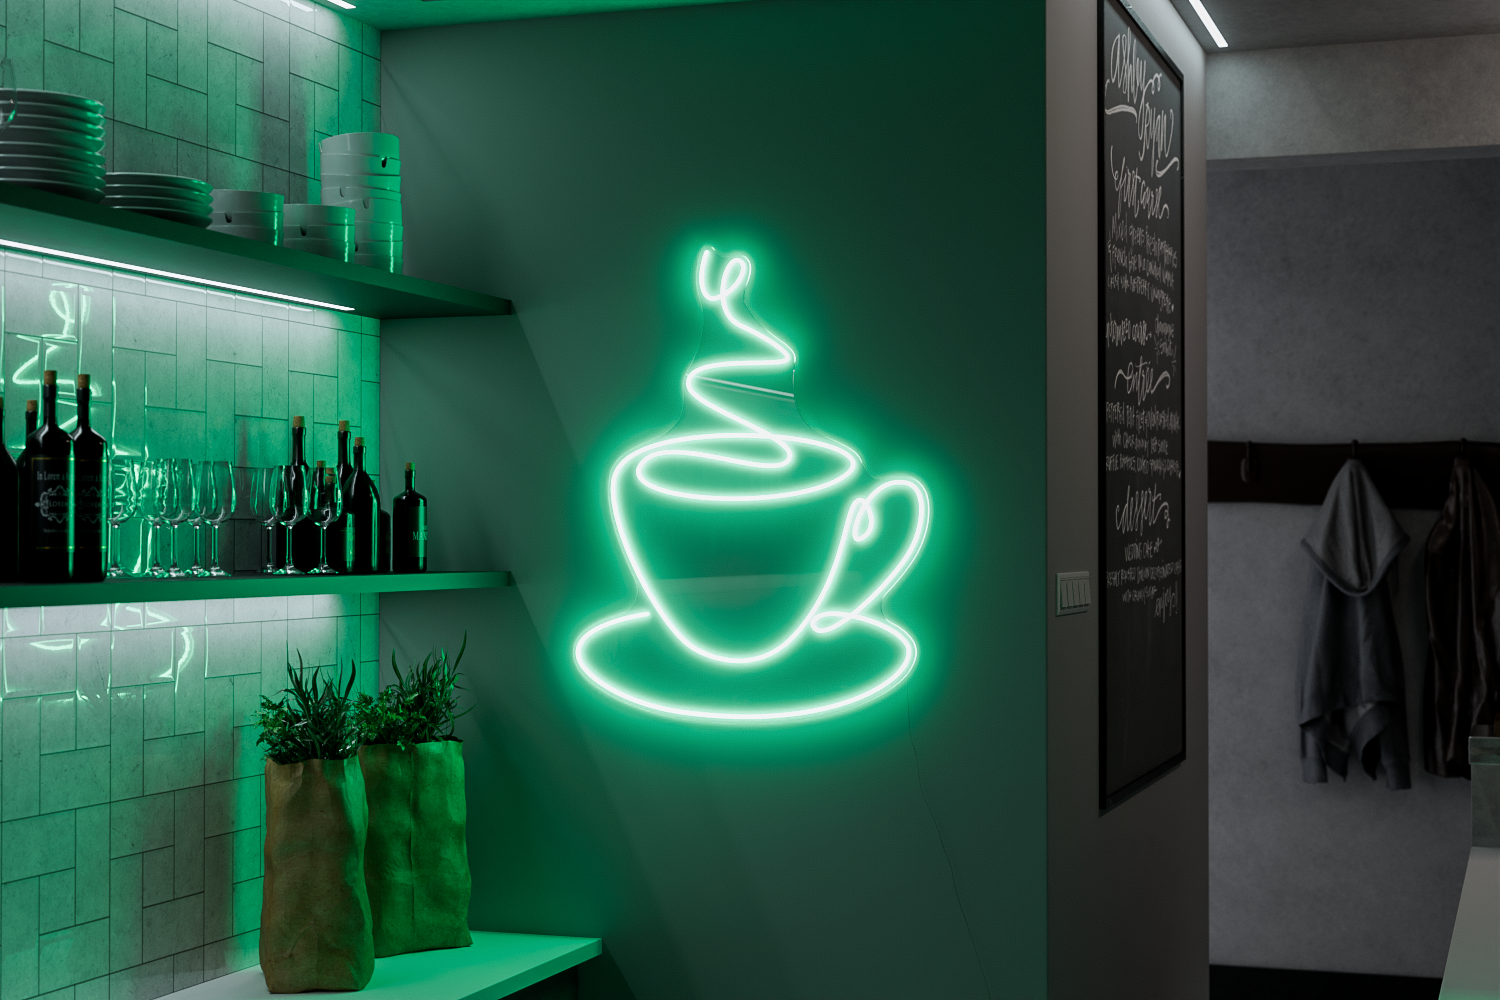 a green neon sign in the shape of a coffee mug